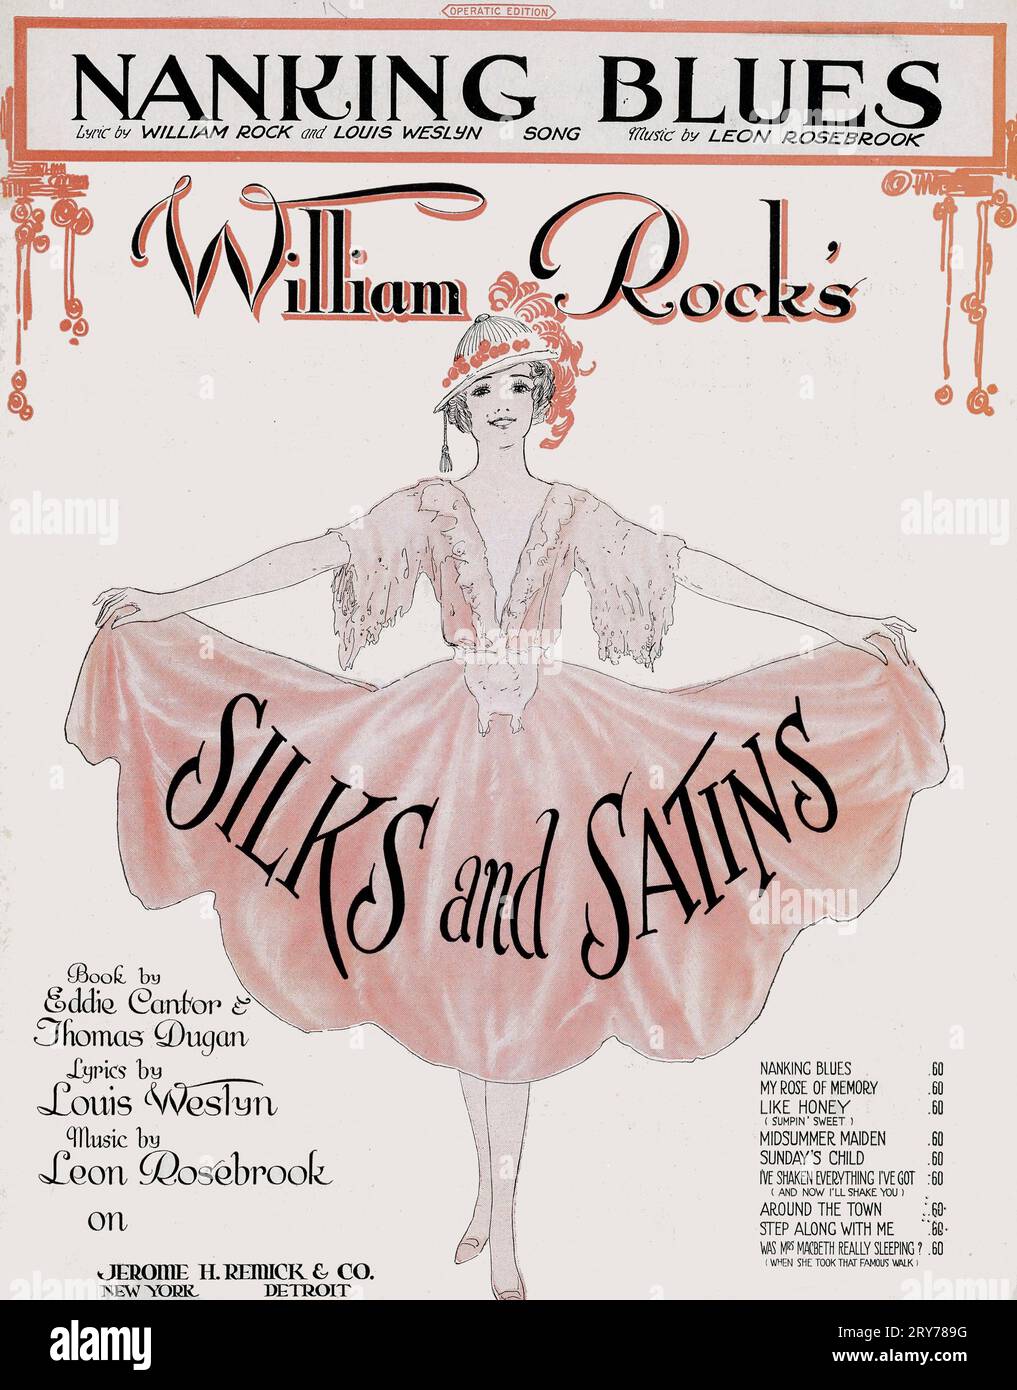 Cover for sheet music for Nanking blues - Lyrics by William Rock and Louis Weslyn, Music by Leon Rosebrook Stock Photo